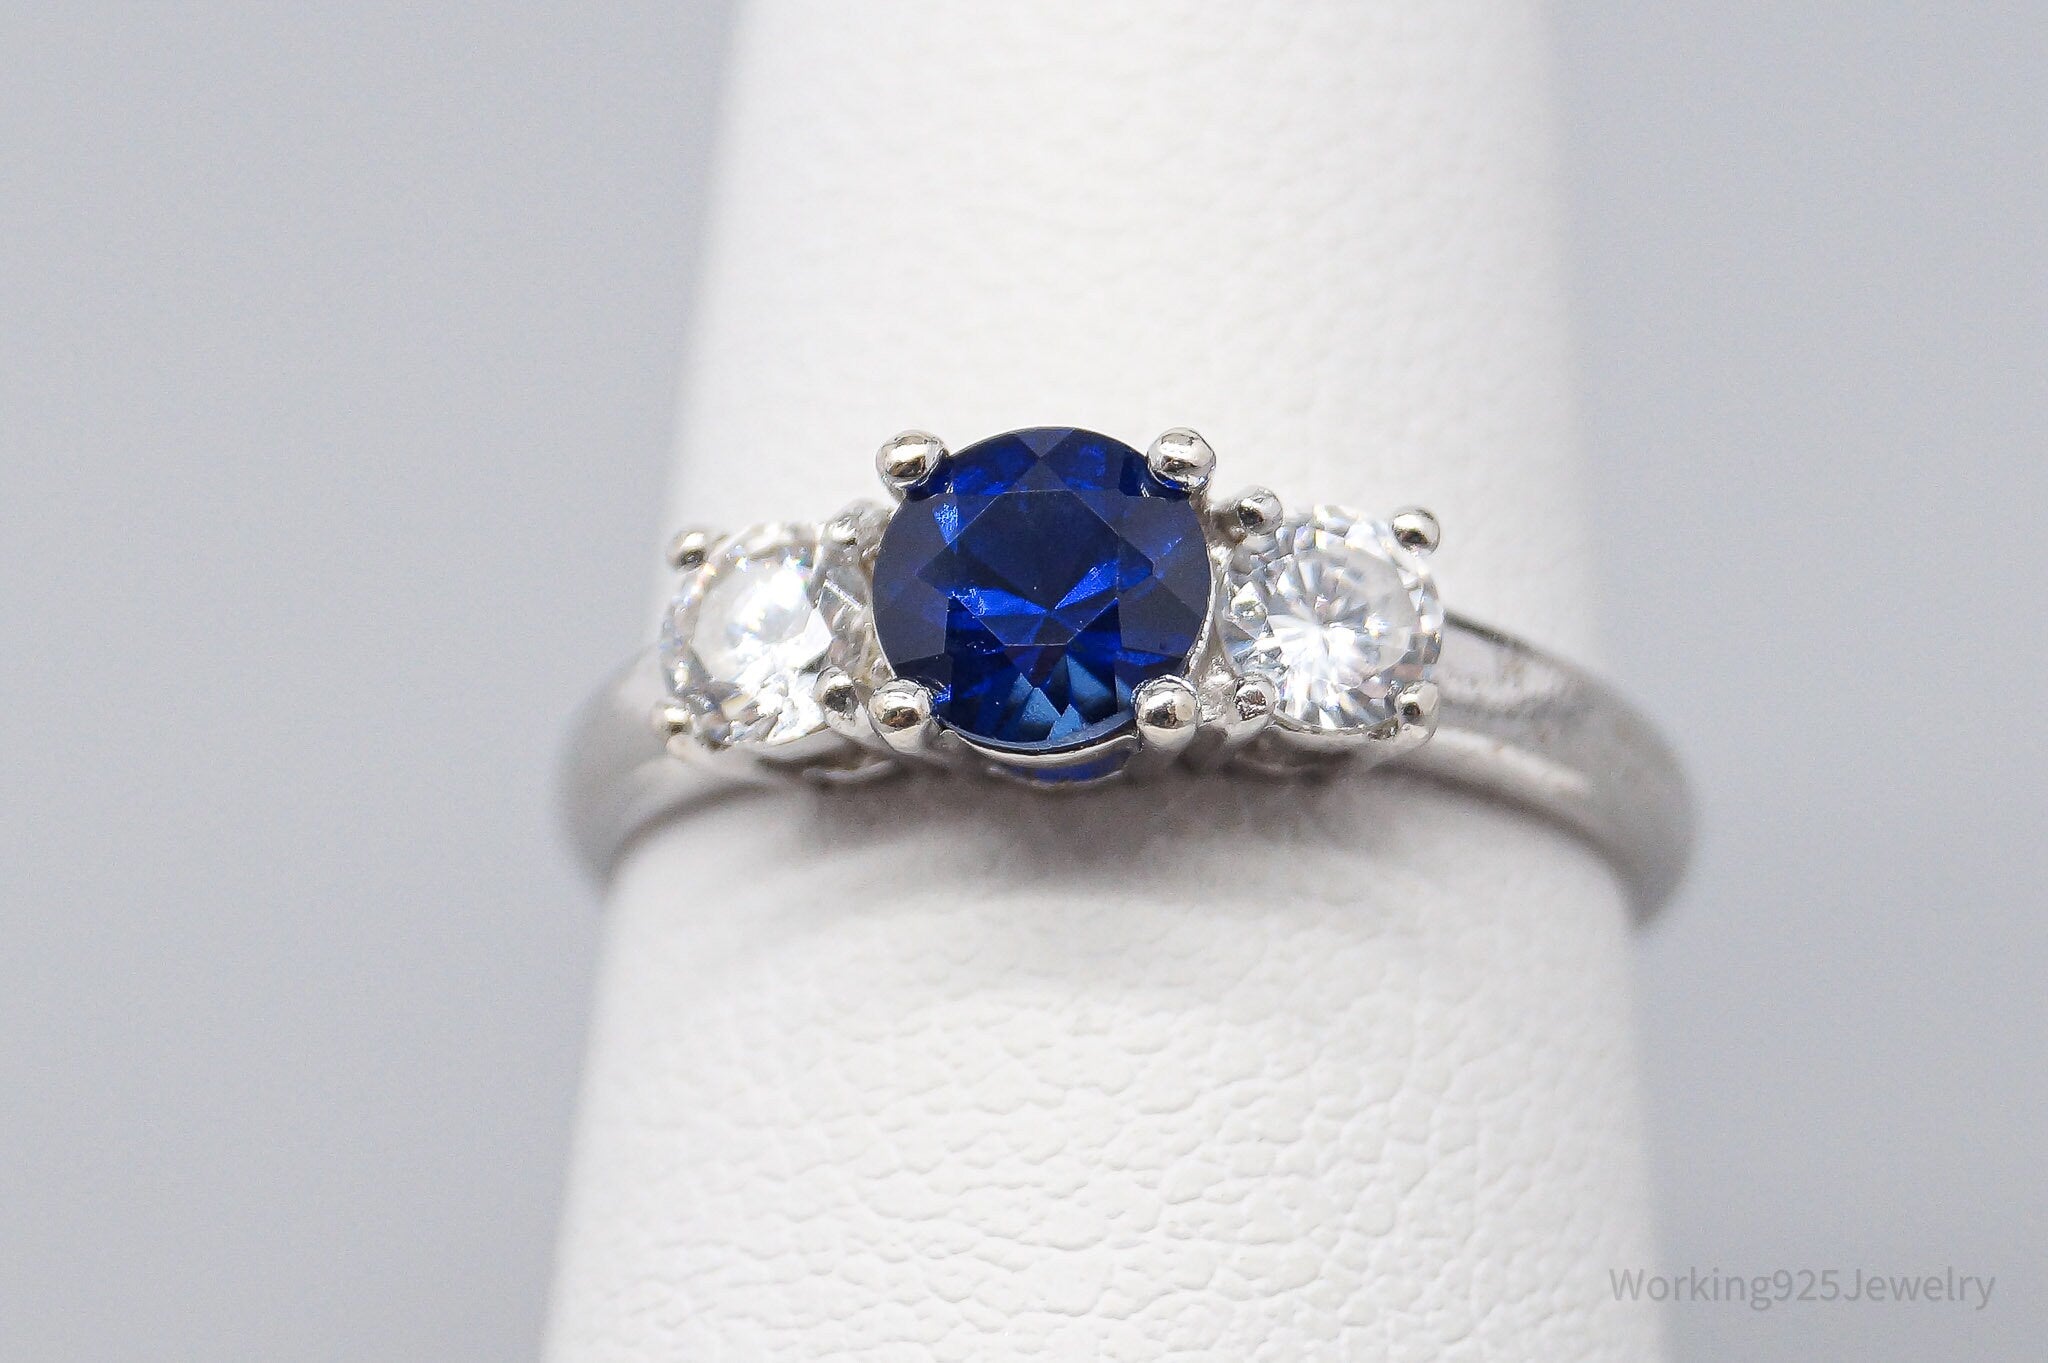 Vintage STAUER Lab Sapphire Cubic Zirconia Sterling Silver Ring Size 5.25